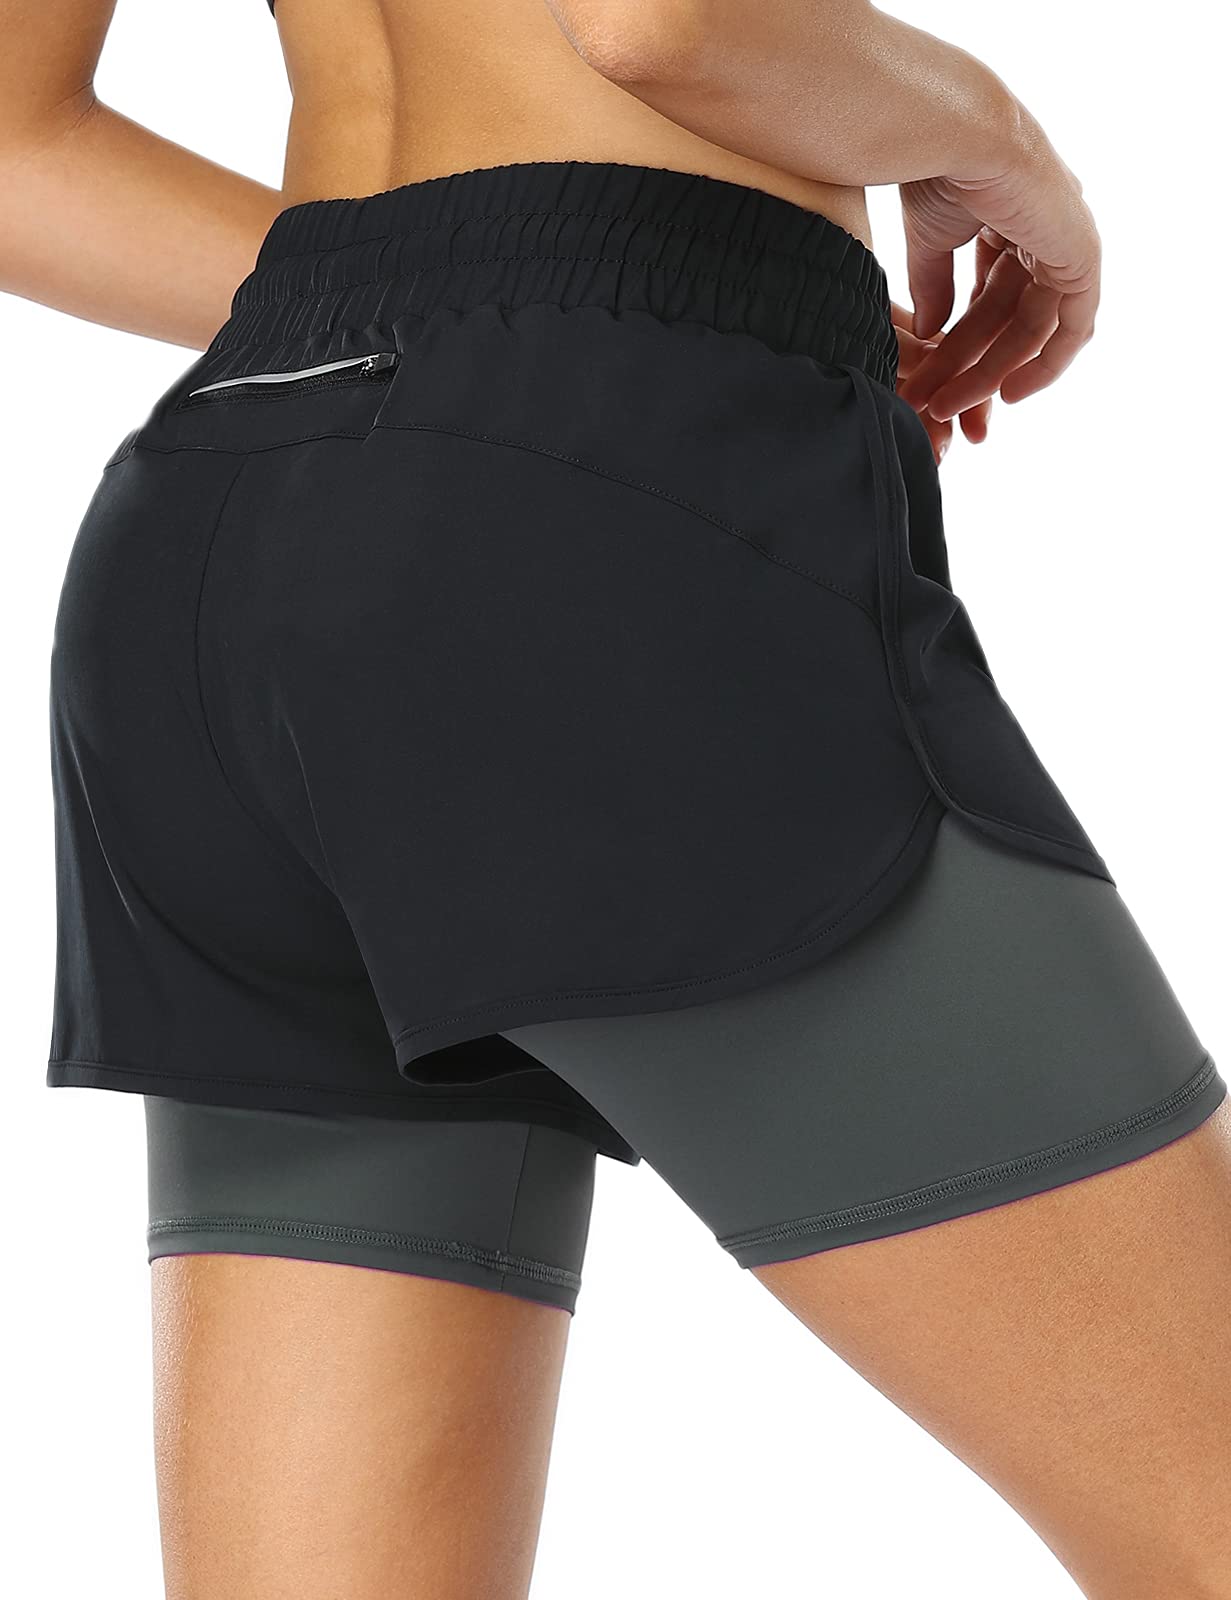 MOVE BEYOND Women's 2 in 1 Running Sports Shorts with Zipper Pocket Drawstring Quick Dry Workout Gym Yoga Shorts